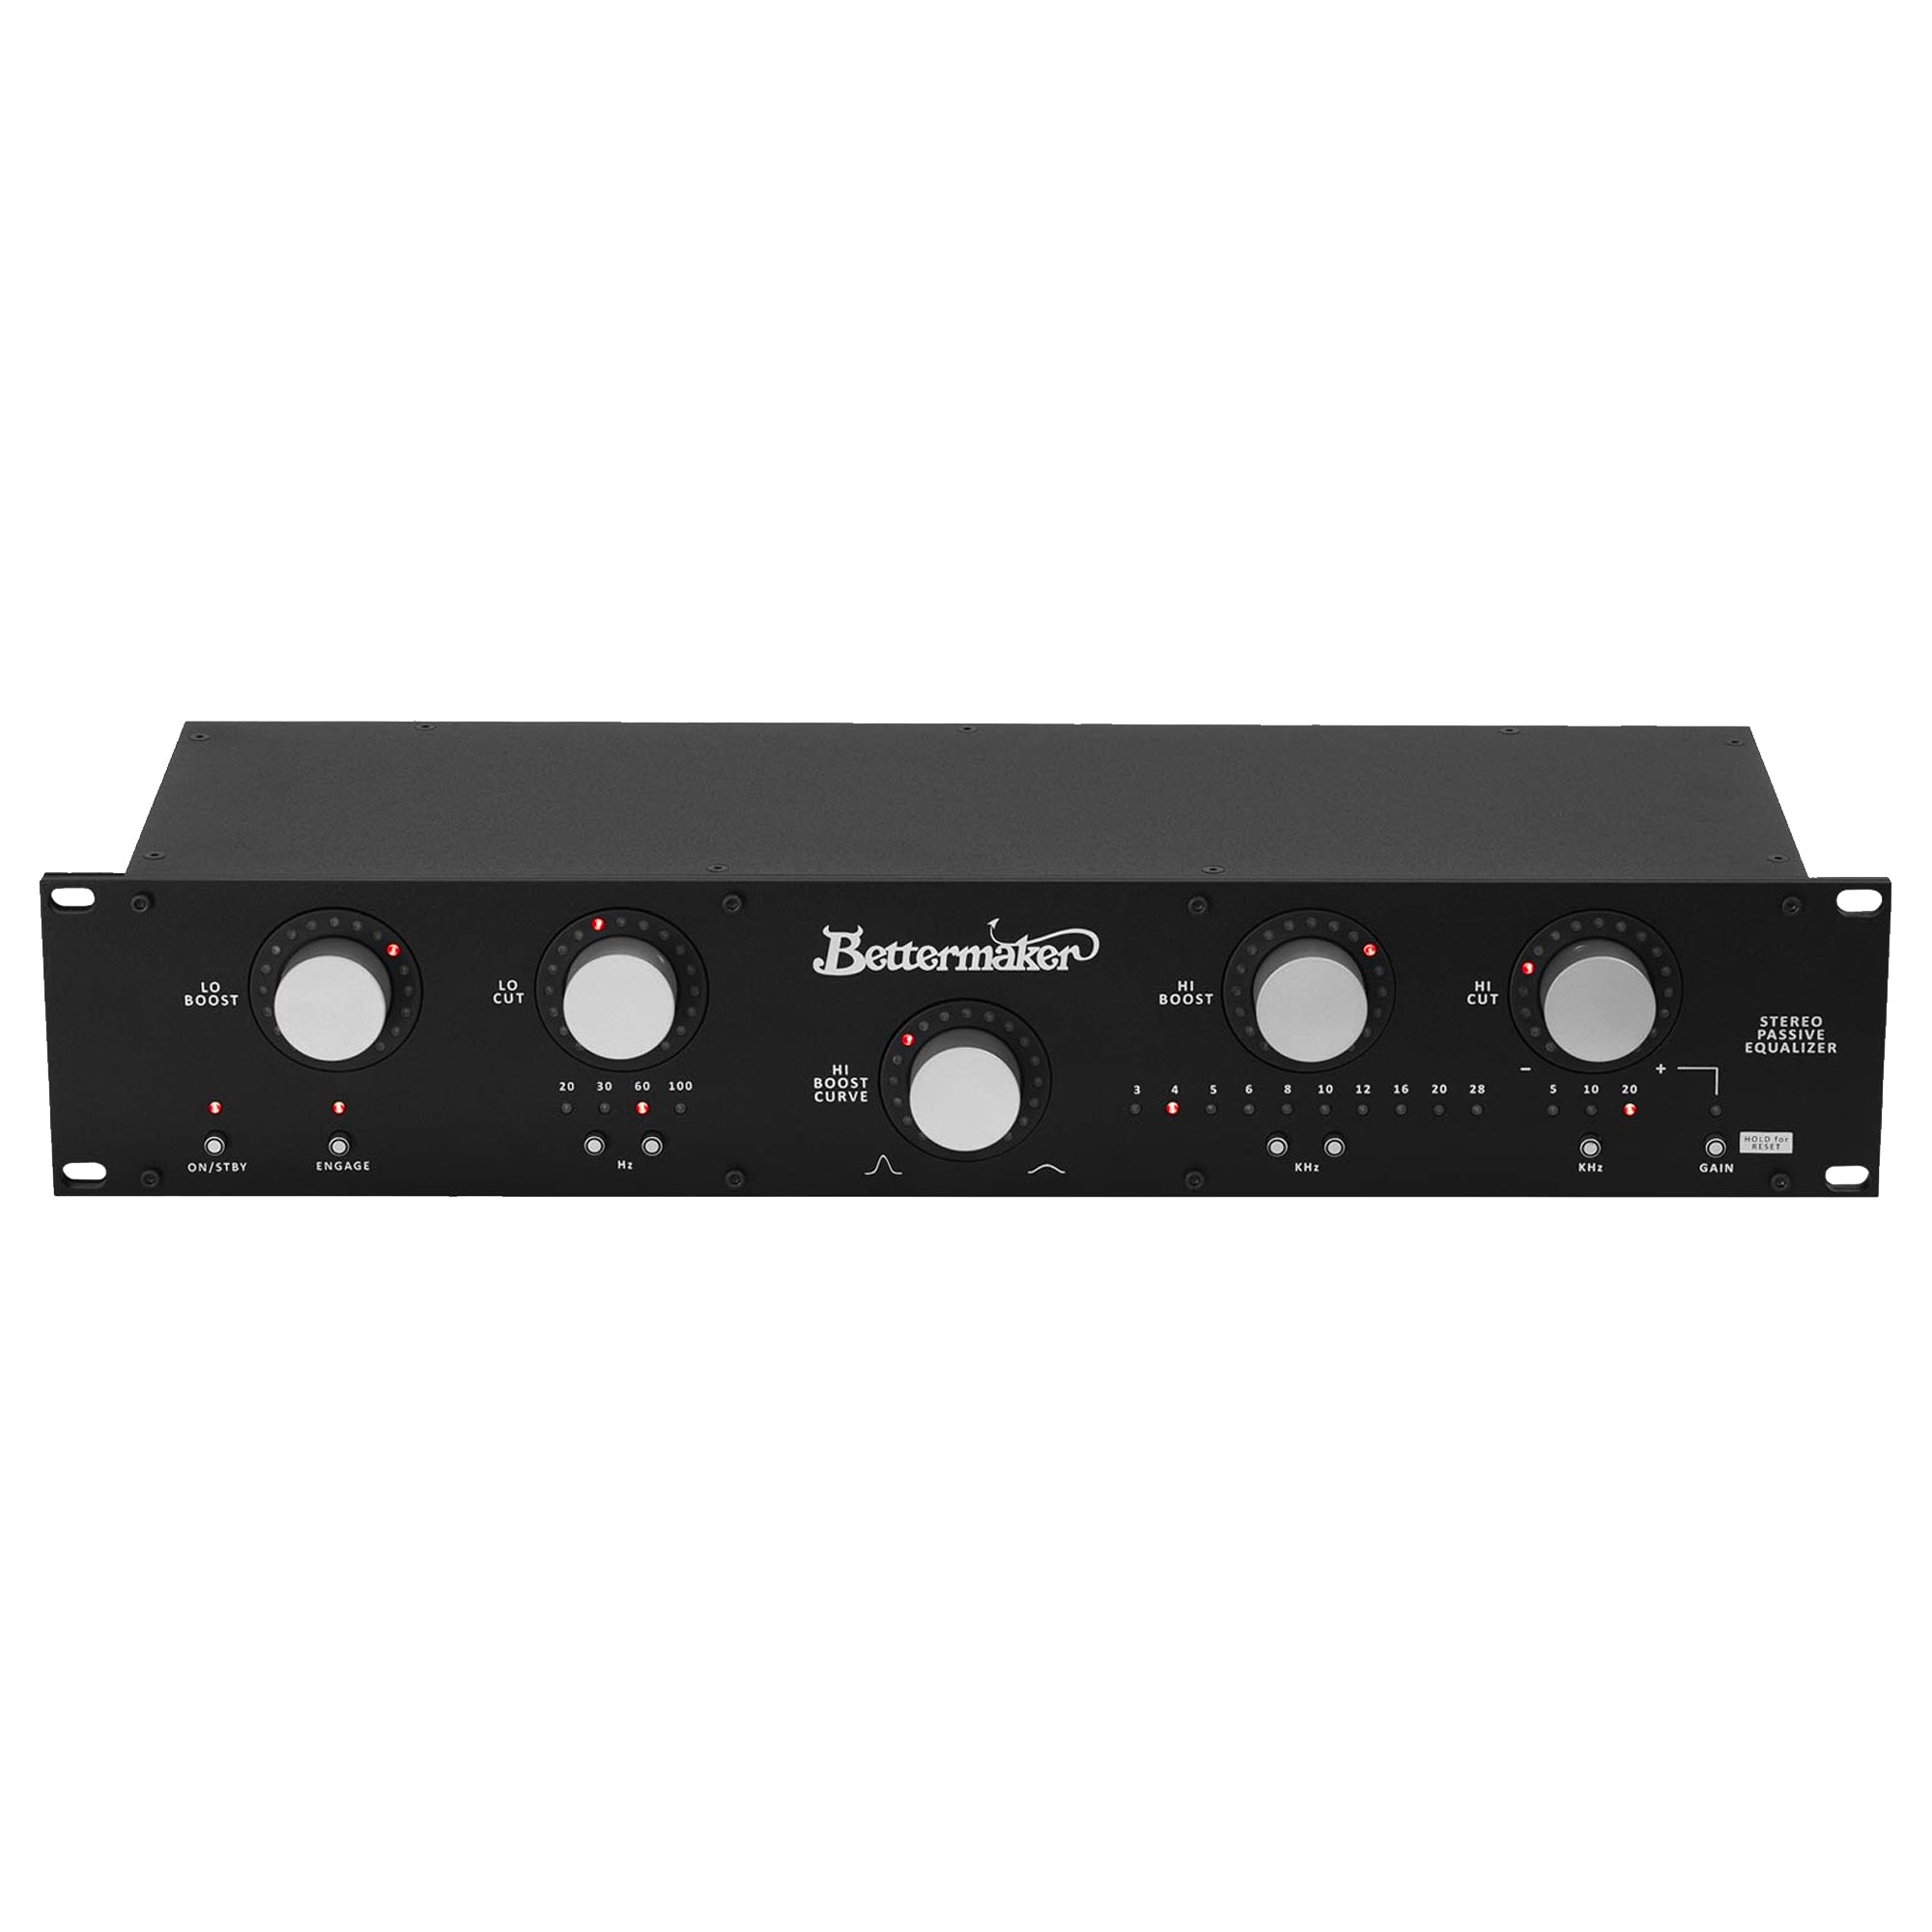 Bettermaker Stereo Passive Equalizer with Plug-in Control